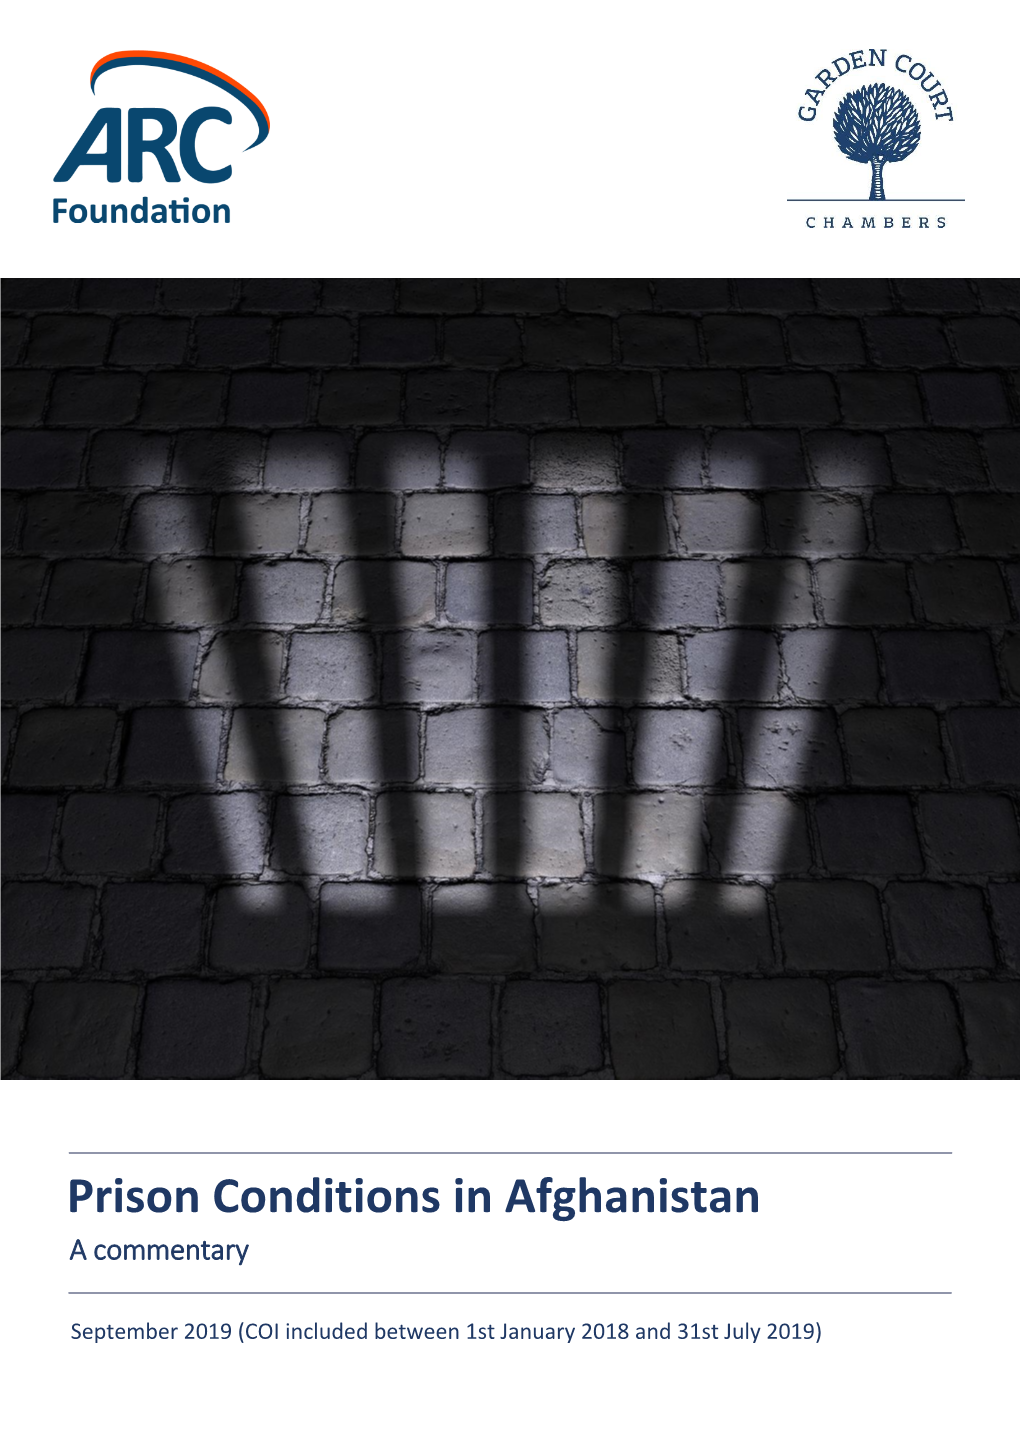 Prison Conditions in Afghanistan a Commentary